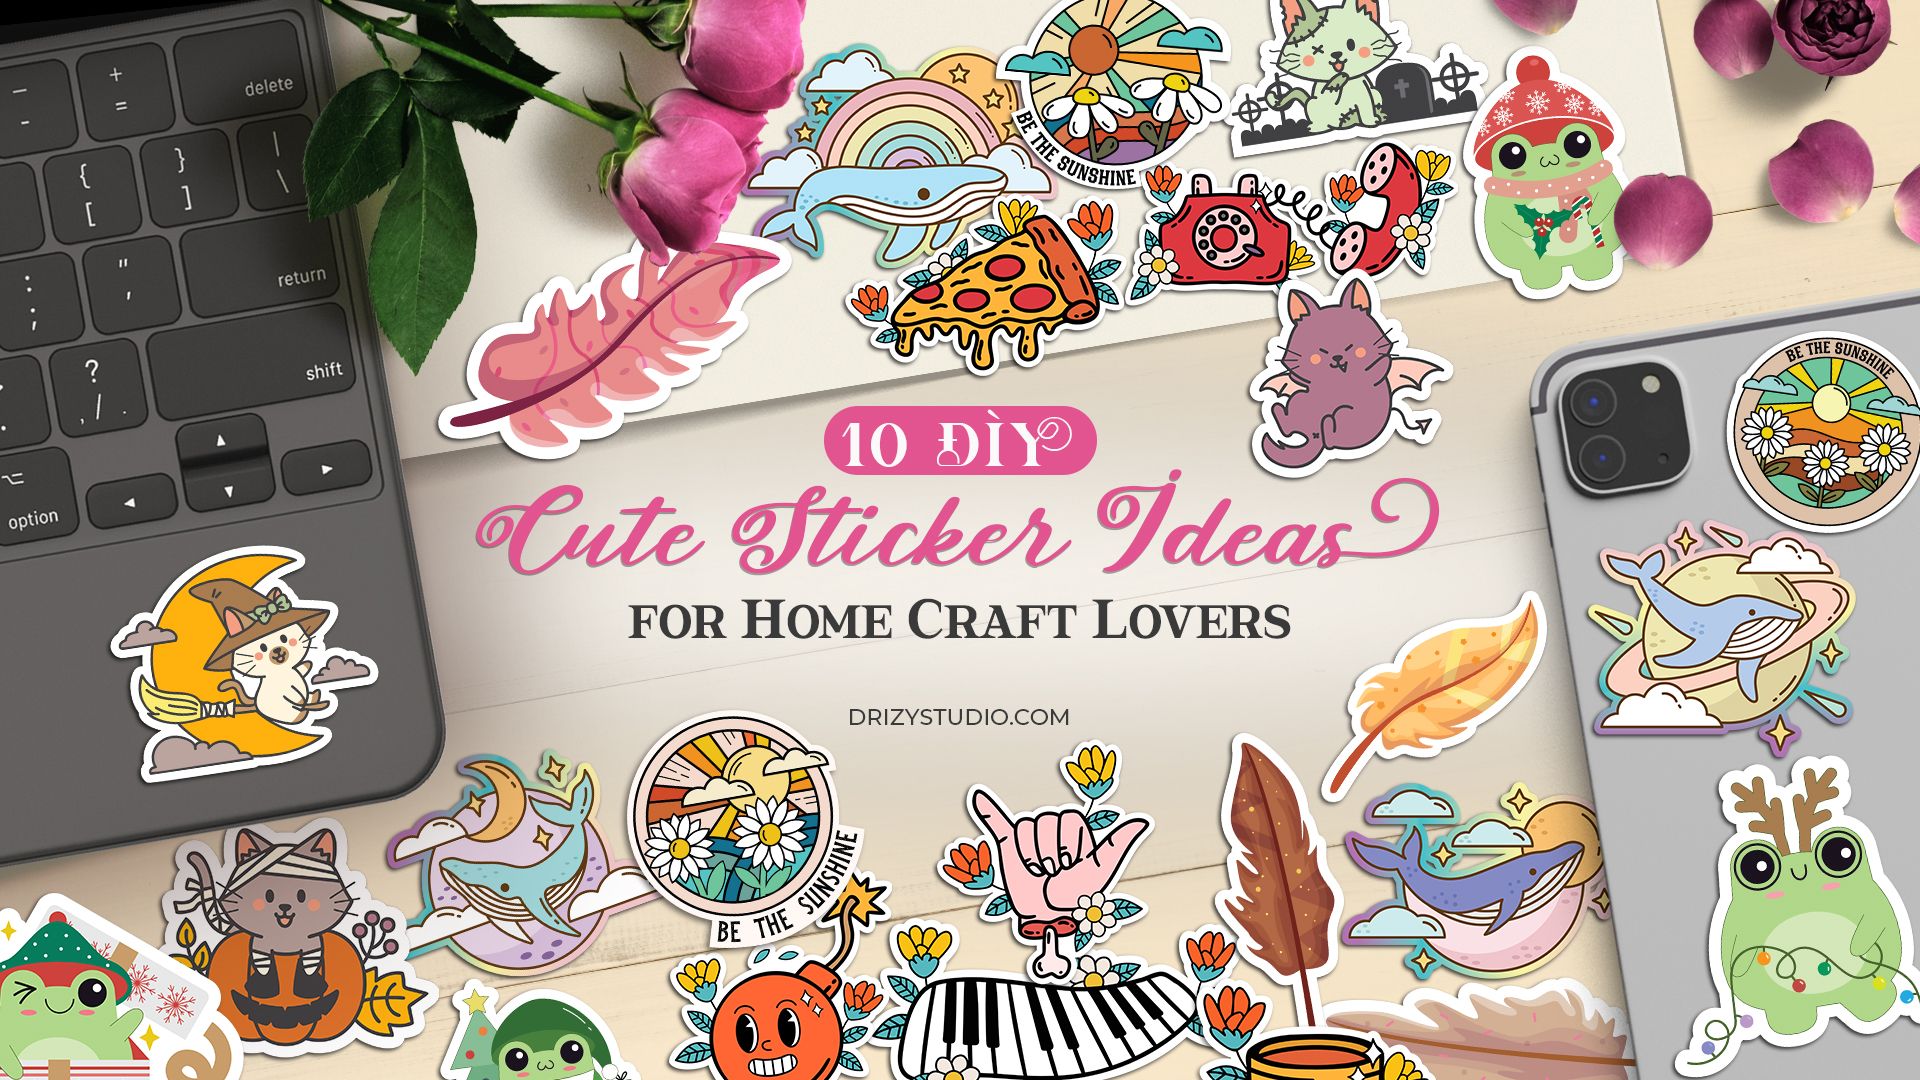 10 DIY Cute Sticker Ideas for Home Craft Lovers COVER